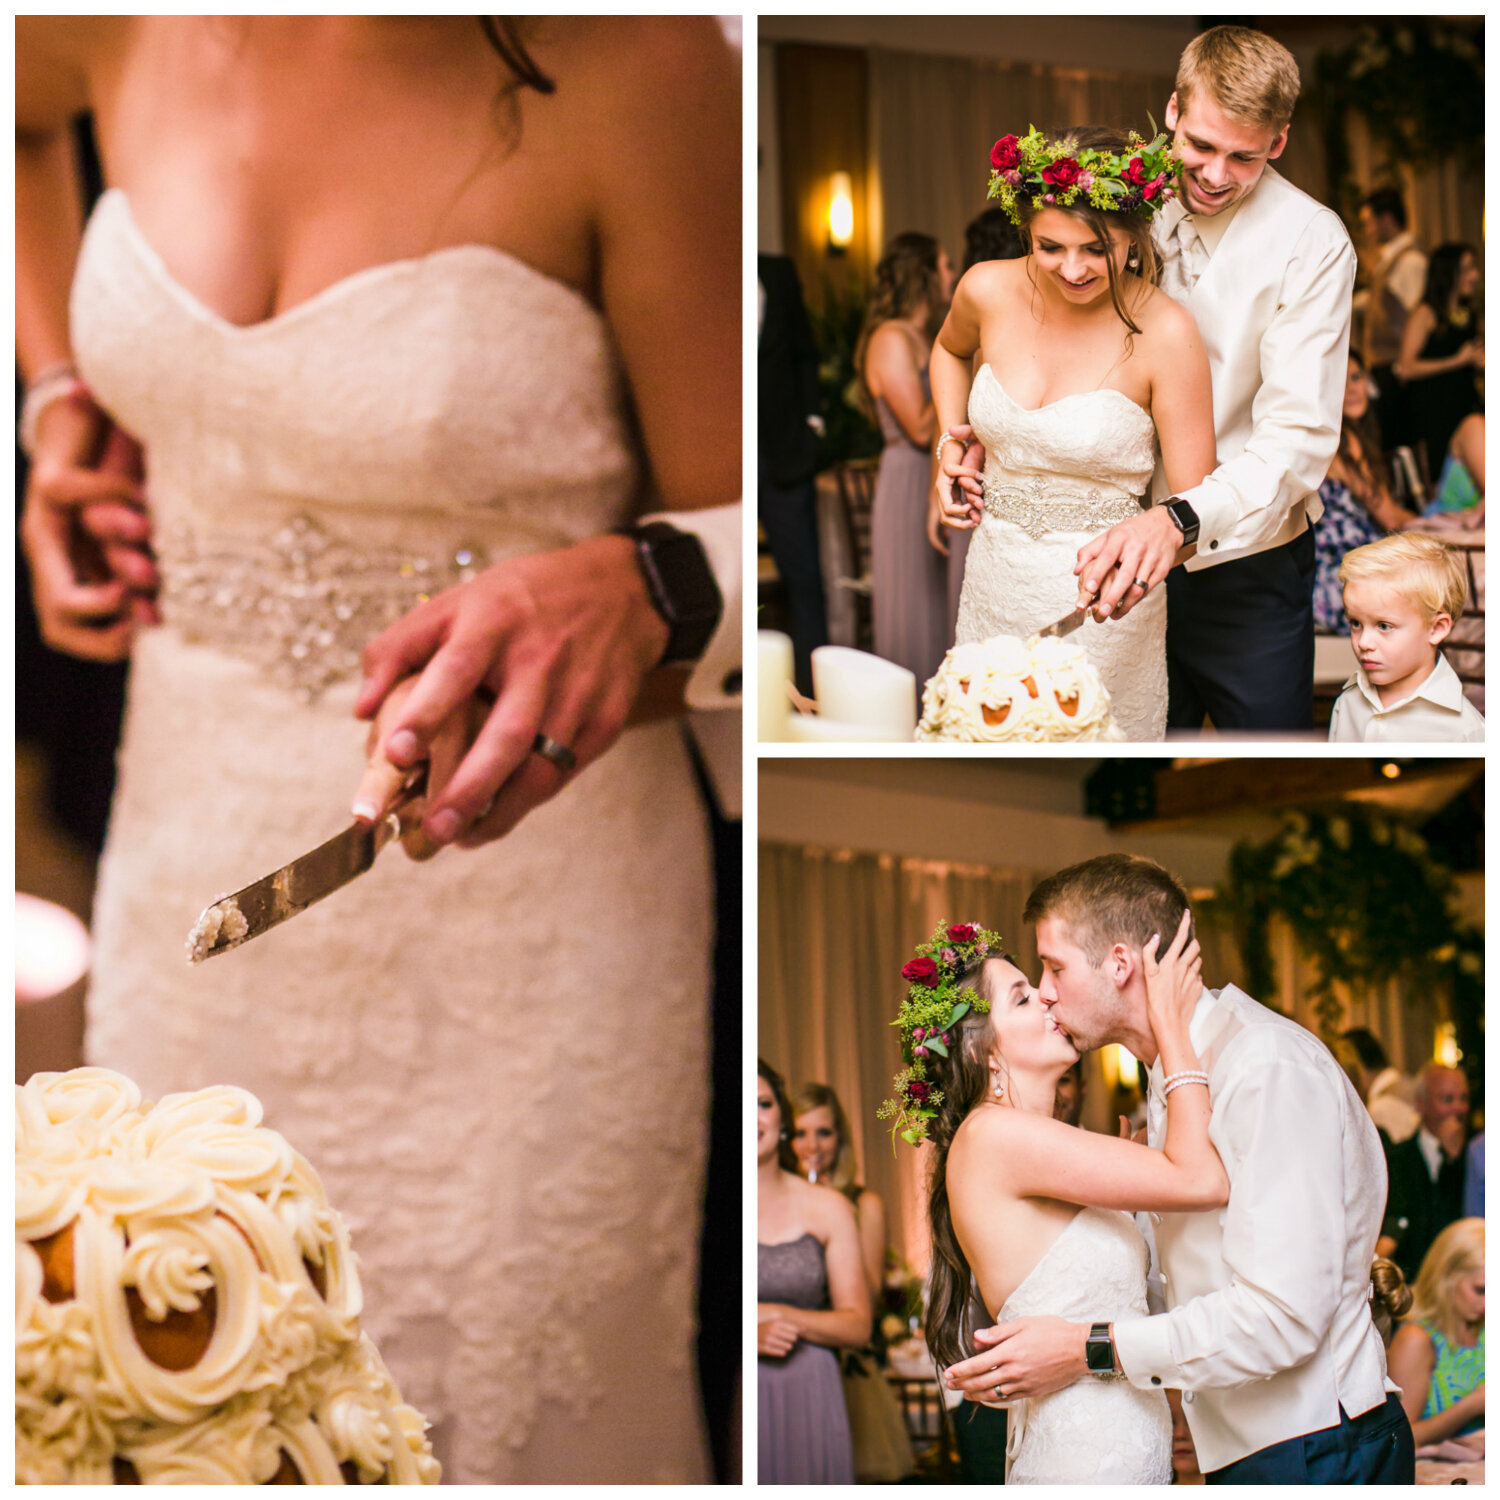  Cake cutting at Highlands Ranch Mansion.&nbsp;&nbsp;  hotographed by JMGant Photography, Denver Colorado wedding photographer.&nbsp; 